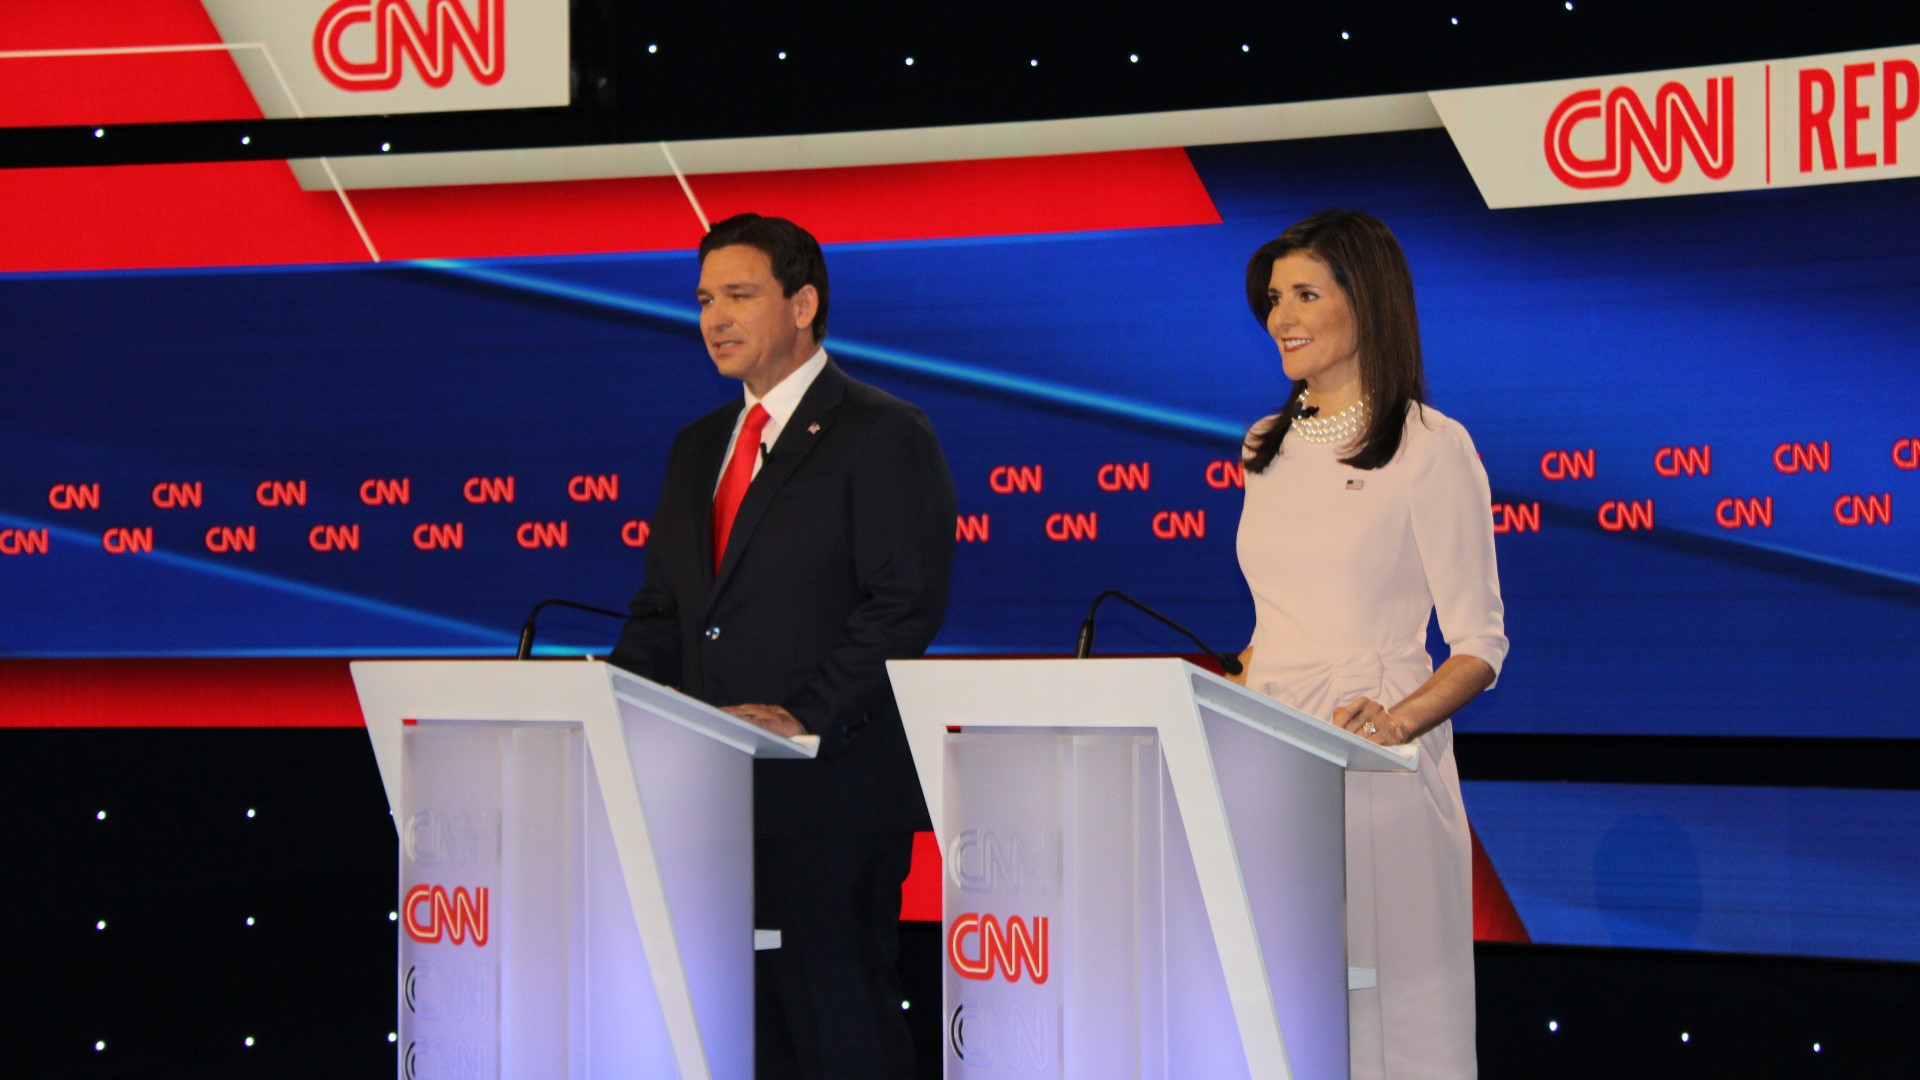 In what was arguably the final push before the Iowa caucuses, both Nikki Haley and Ron DeSantis hoped to gain crucial ground over one another.